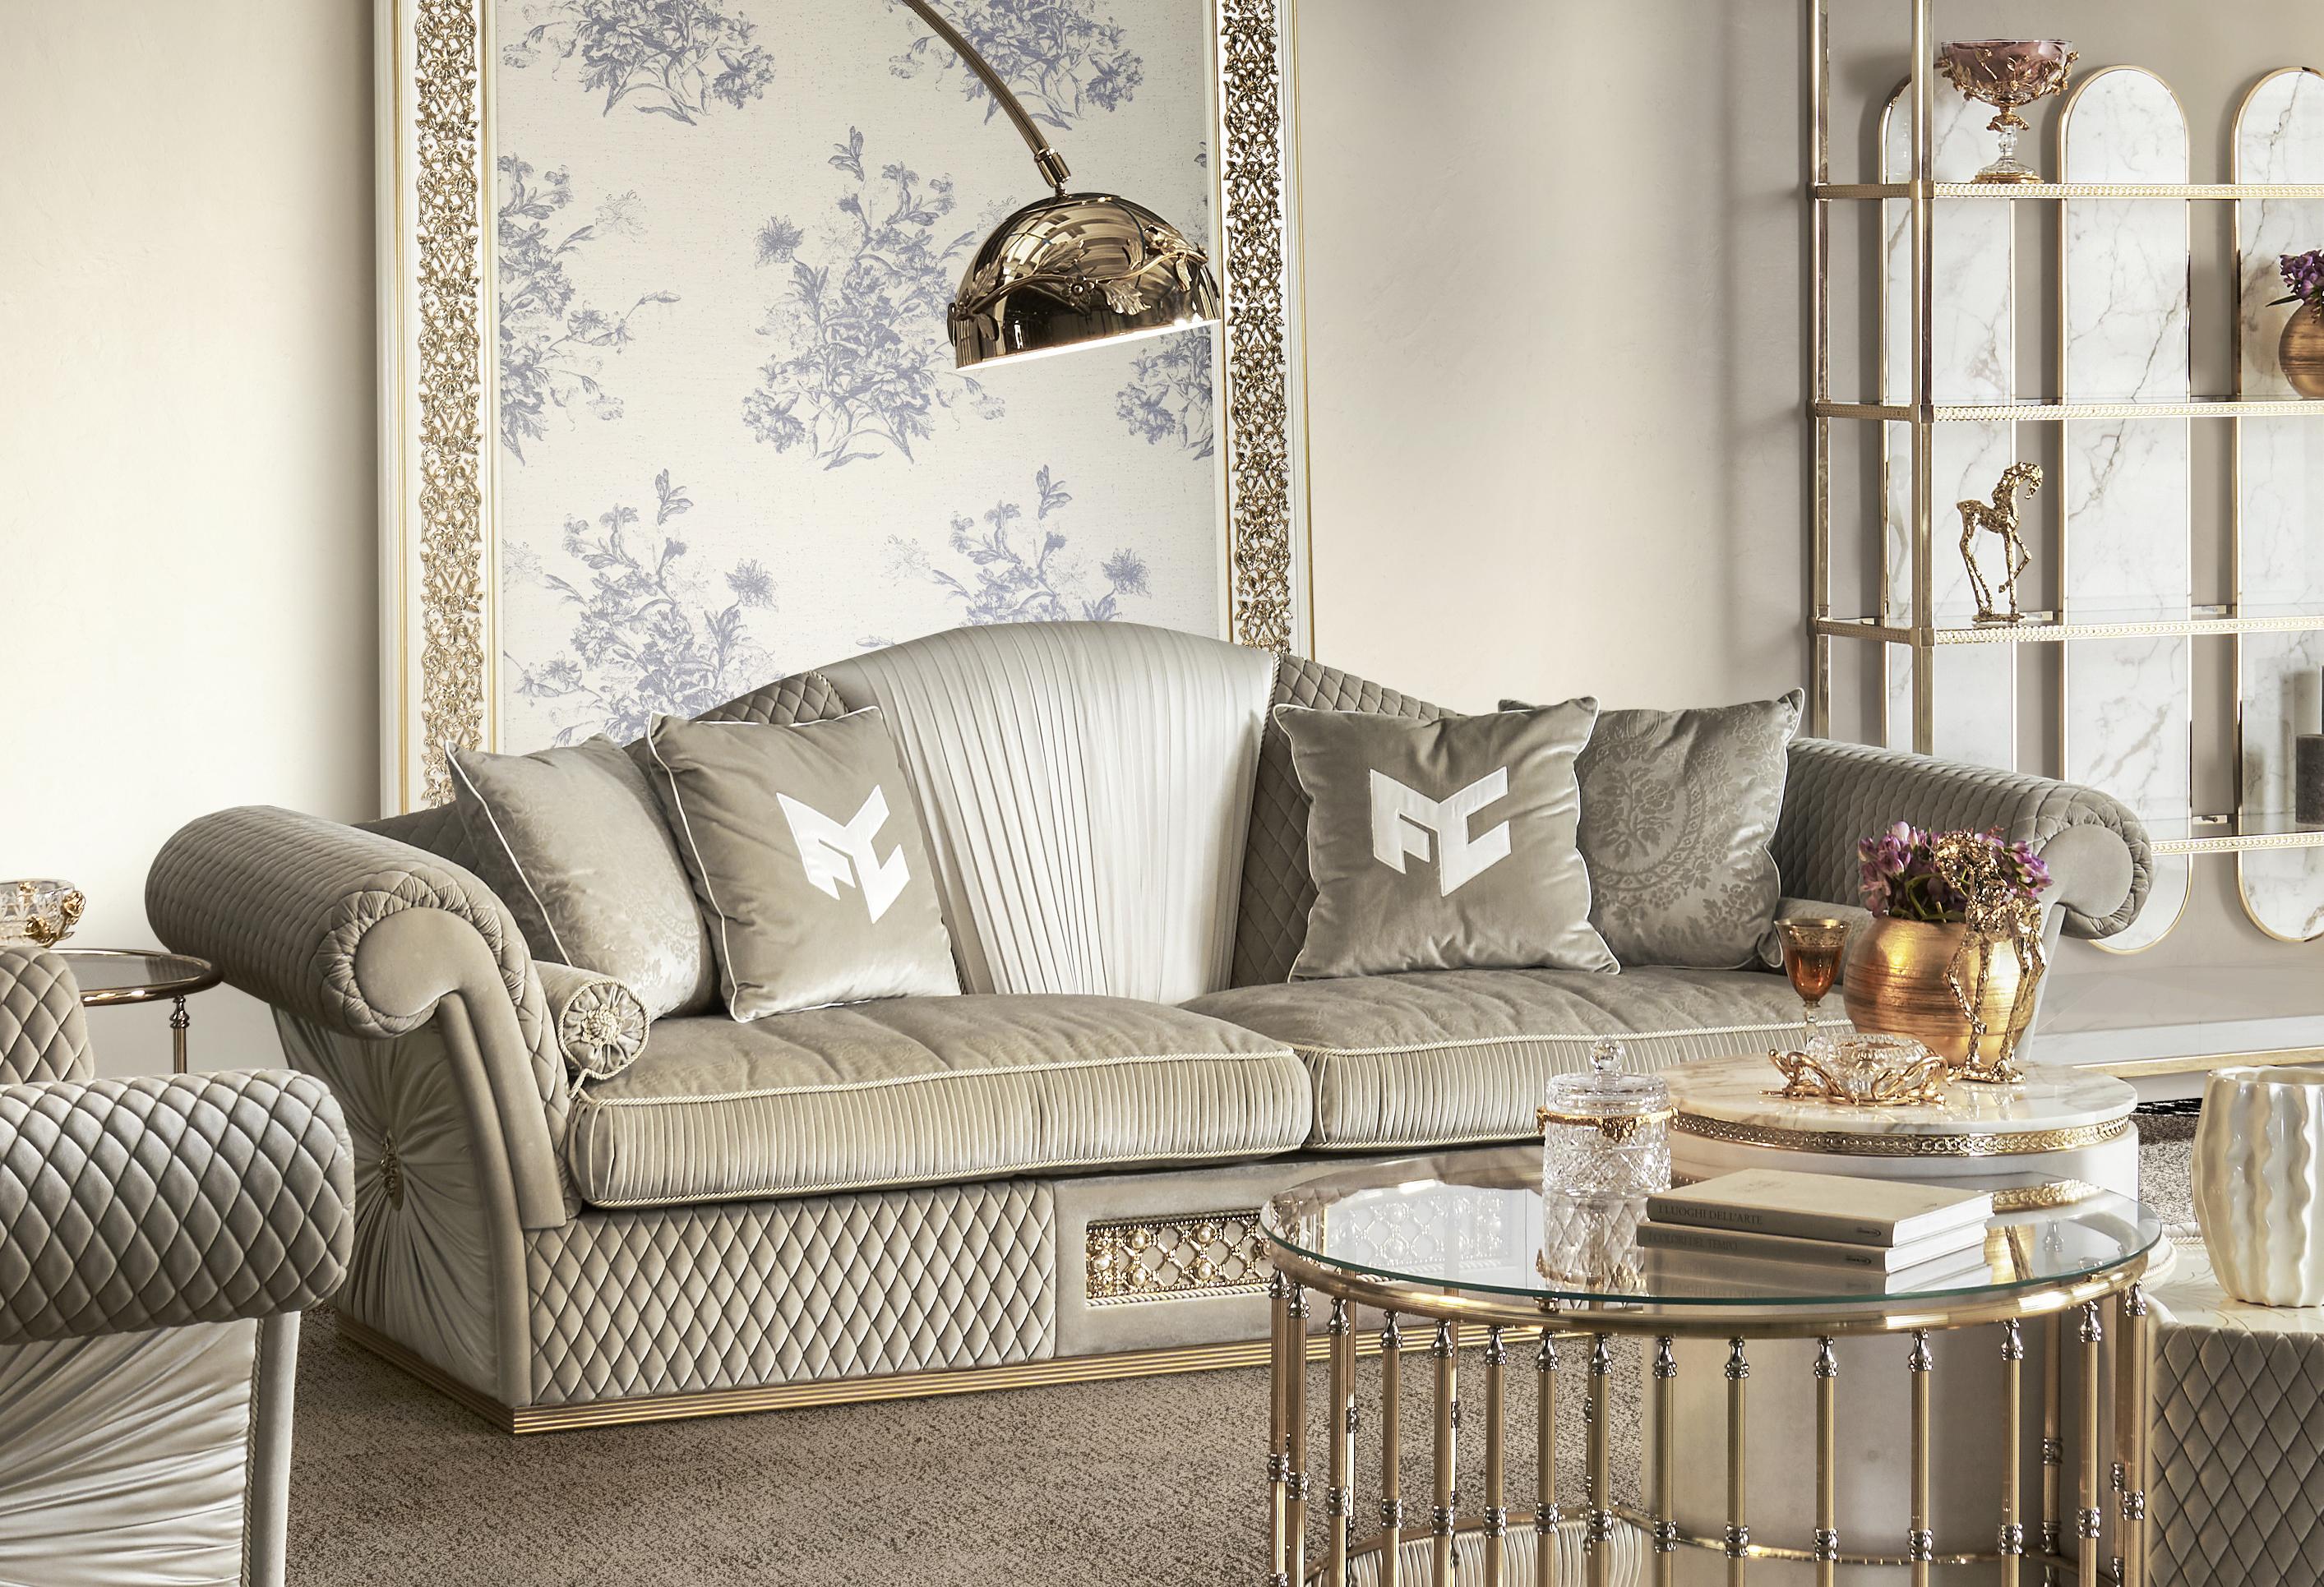 Cozy and majestic, the Equilibrium 3-seater sofa invites you to relax and enjoy unparalleled comfort.
Whether placed in the living room of a historic home or in a modern setting, this item adds a touch of luxury and prestige, creating an atmosphere